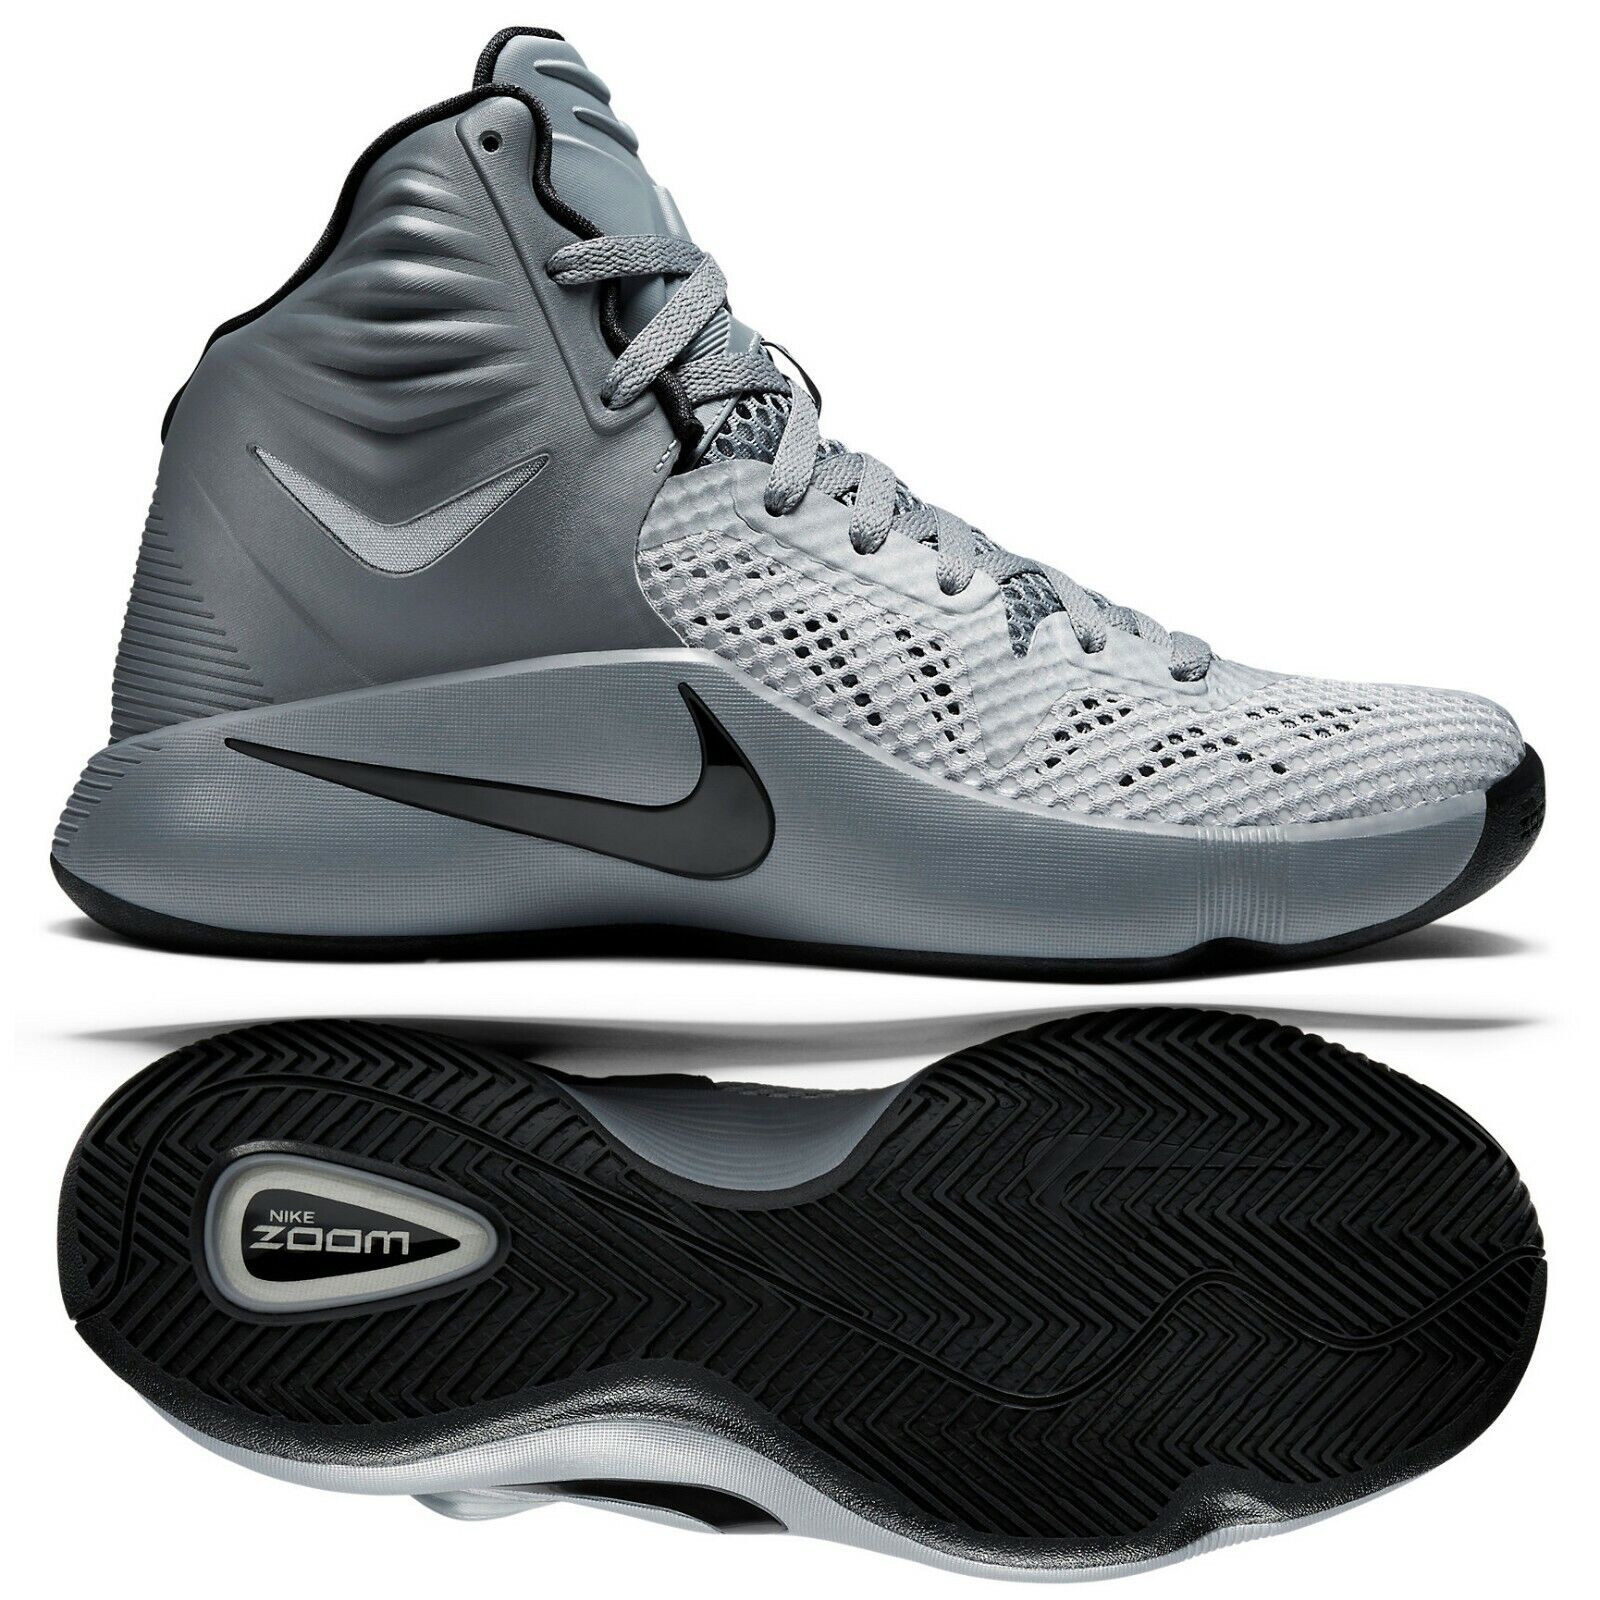 Forge matchmaker Spending Nike Zoom Hyperfuse 2014 Wolf Grey/Black/Grey 684591-002 Men's Basketball  Shoes